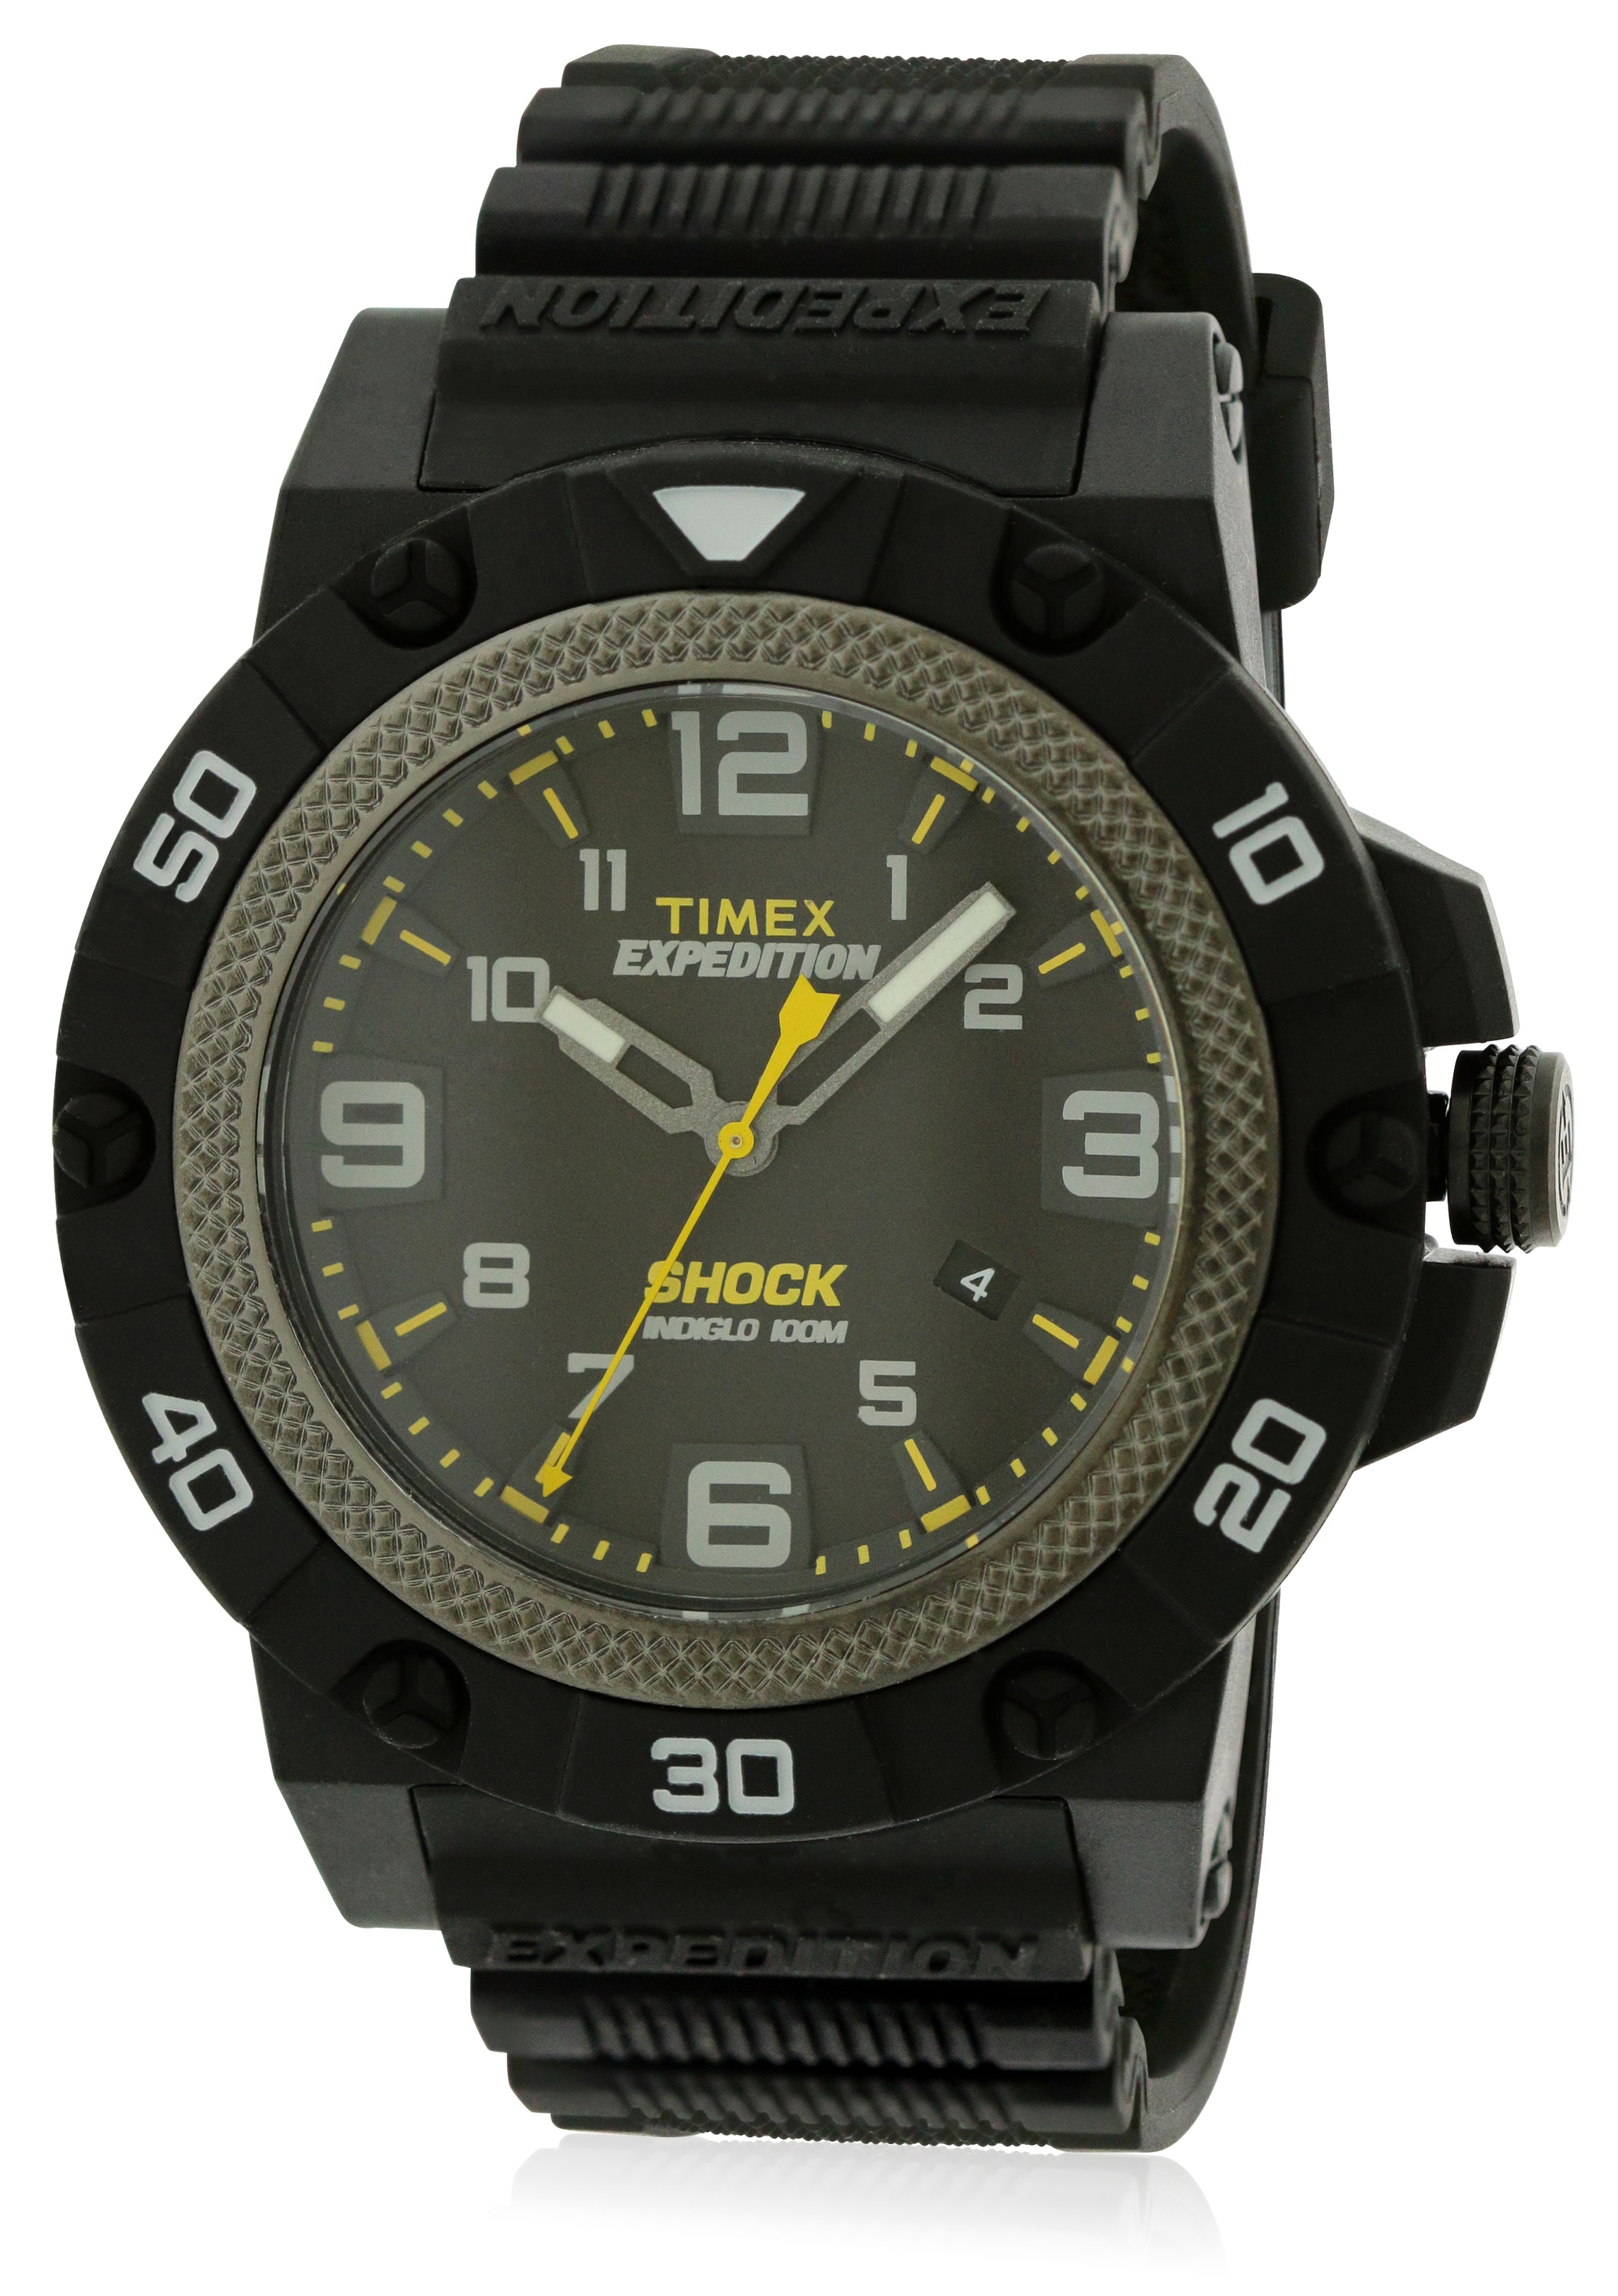 Timex Expedition Field Shock Black Resin Mens Watch TW4B01000